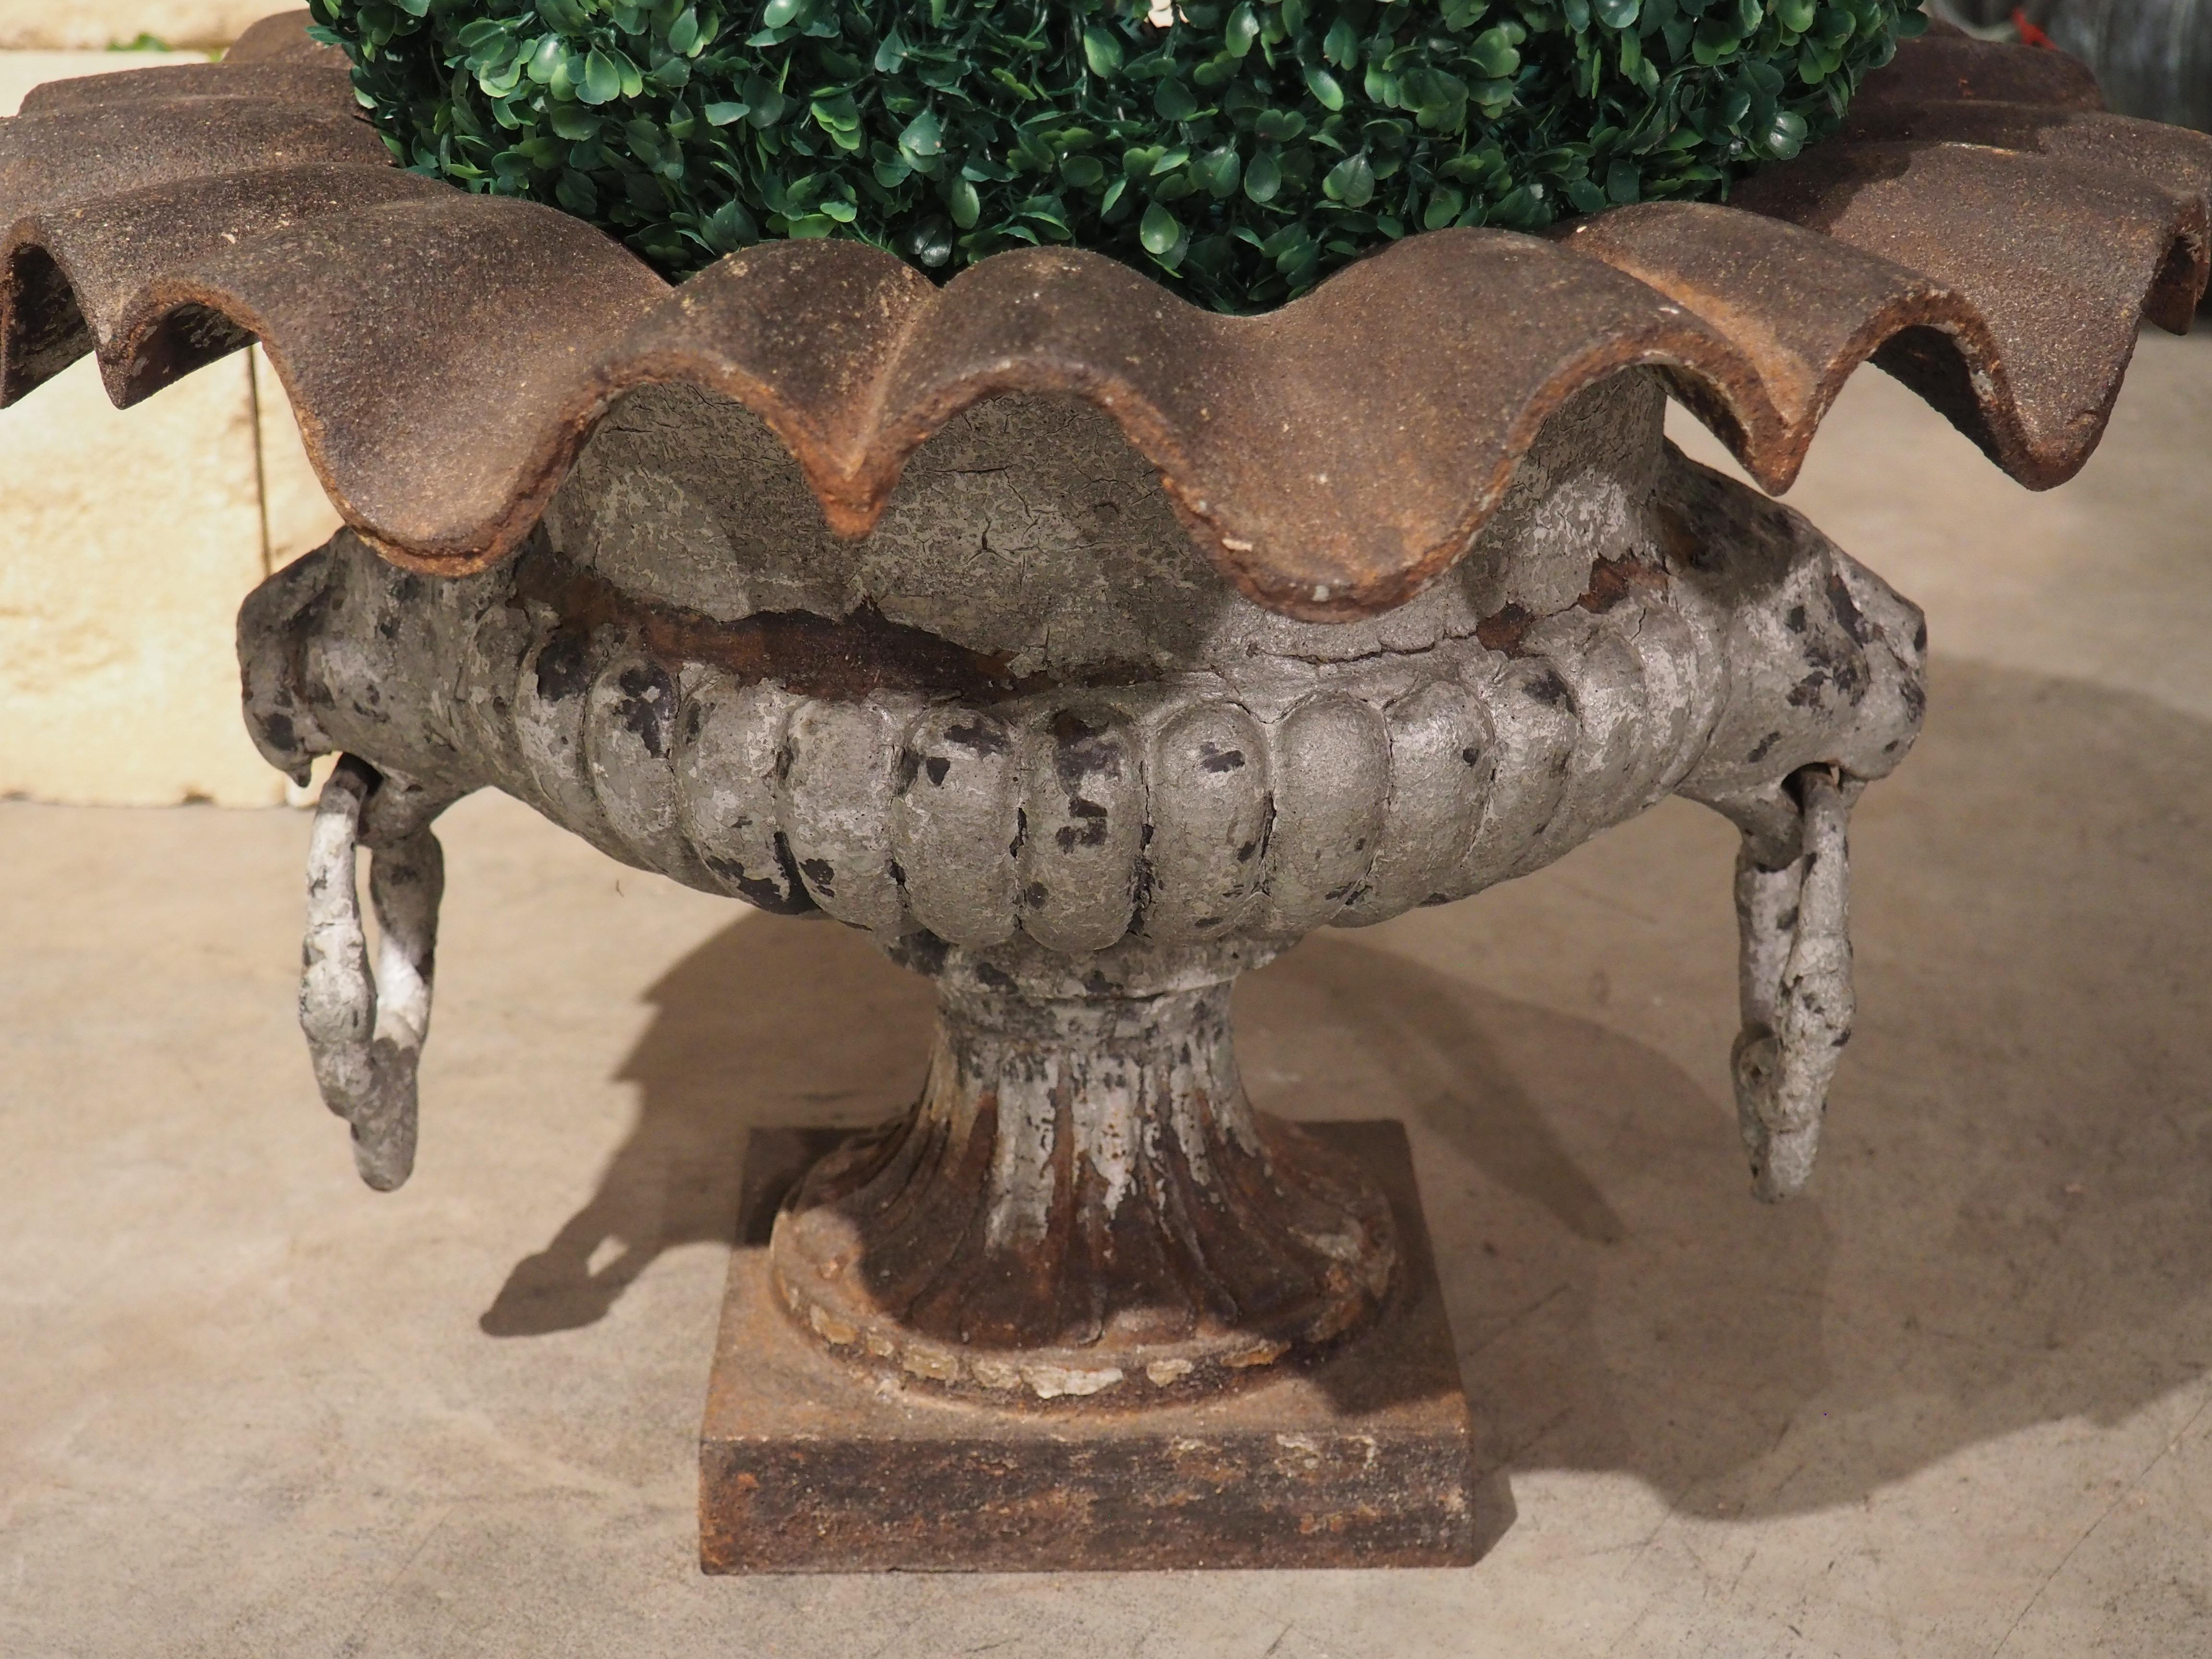 A timeless vase with lion head handles and gadrooning, this cast iron vasque de jardin was created in France in the 1800’s. Vasque de Jardin is the term used to describe small vessels that are wider than they are high.

The scalloped rim is